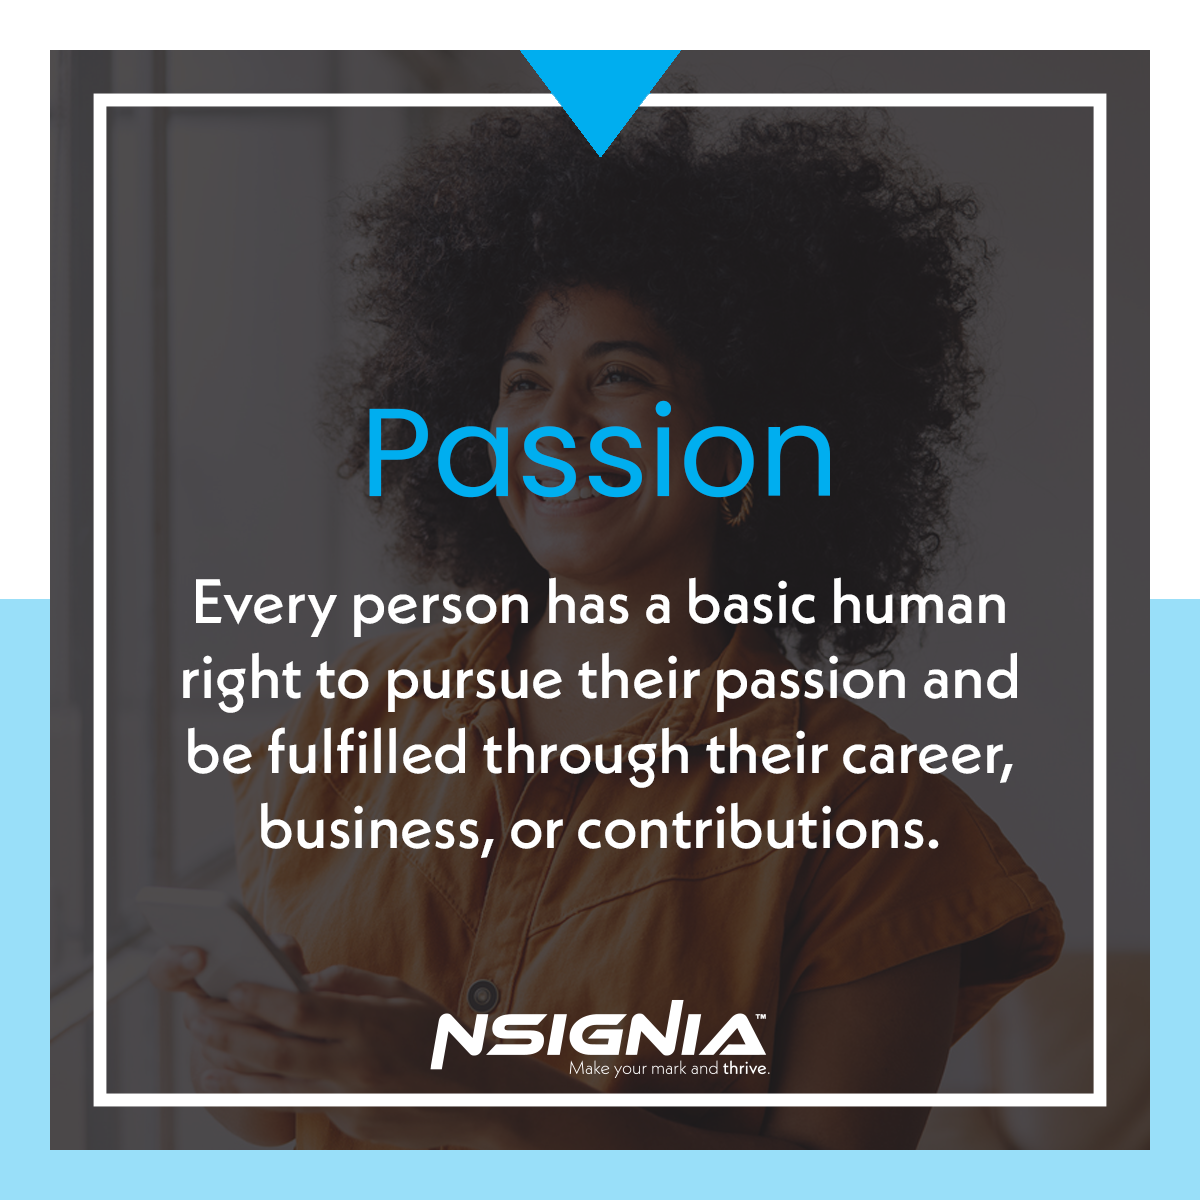 Passion - Every person has a basic human right to pursue their passion and be fulfilled through their career, business, or contributions.